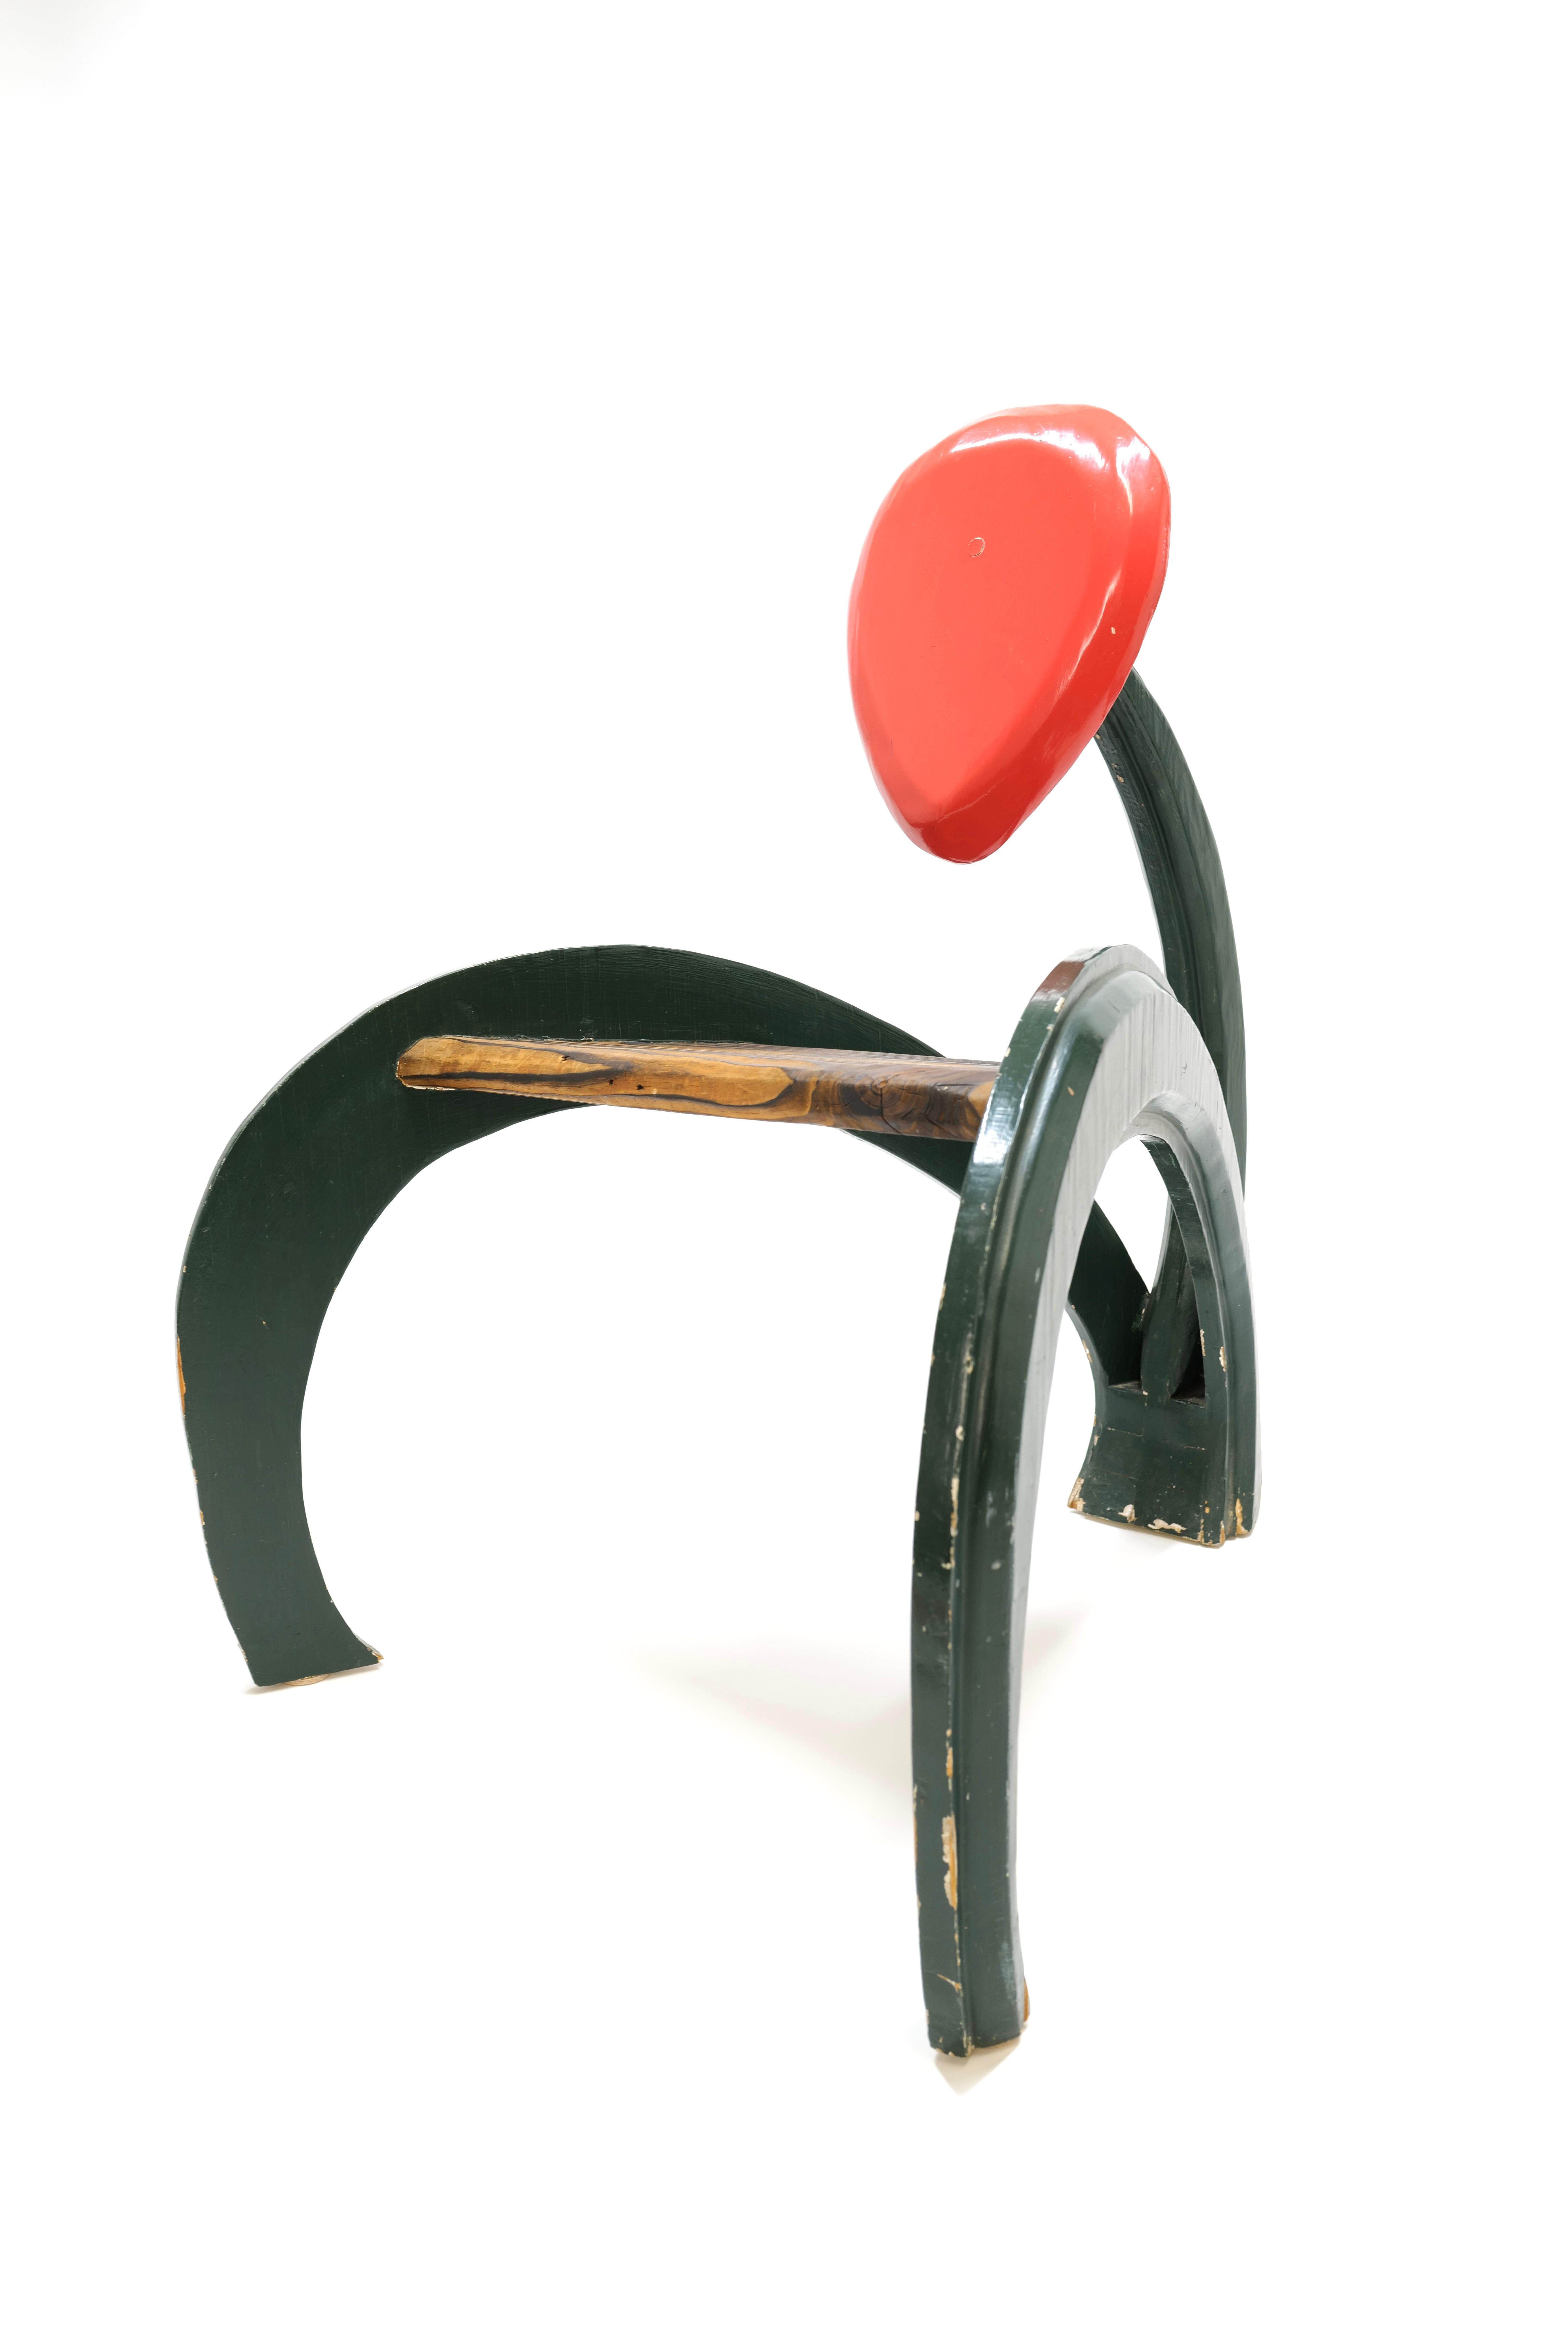 American Prototype Wood Chair Resembling a Flower Stamen For Sale